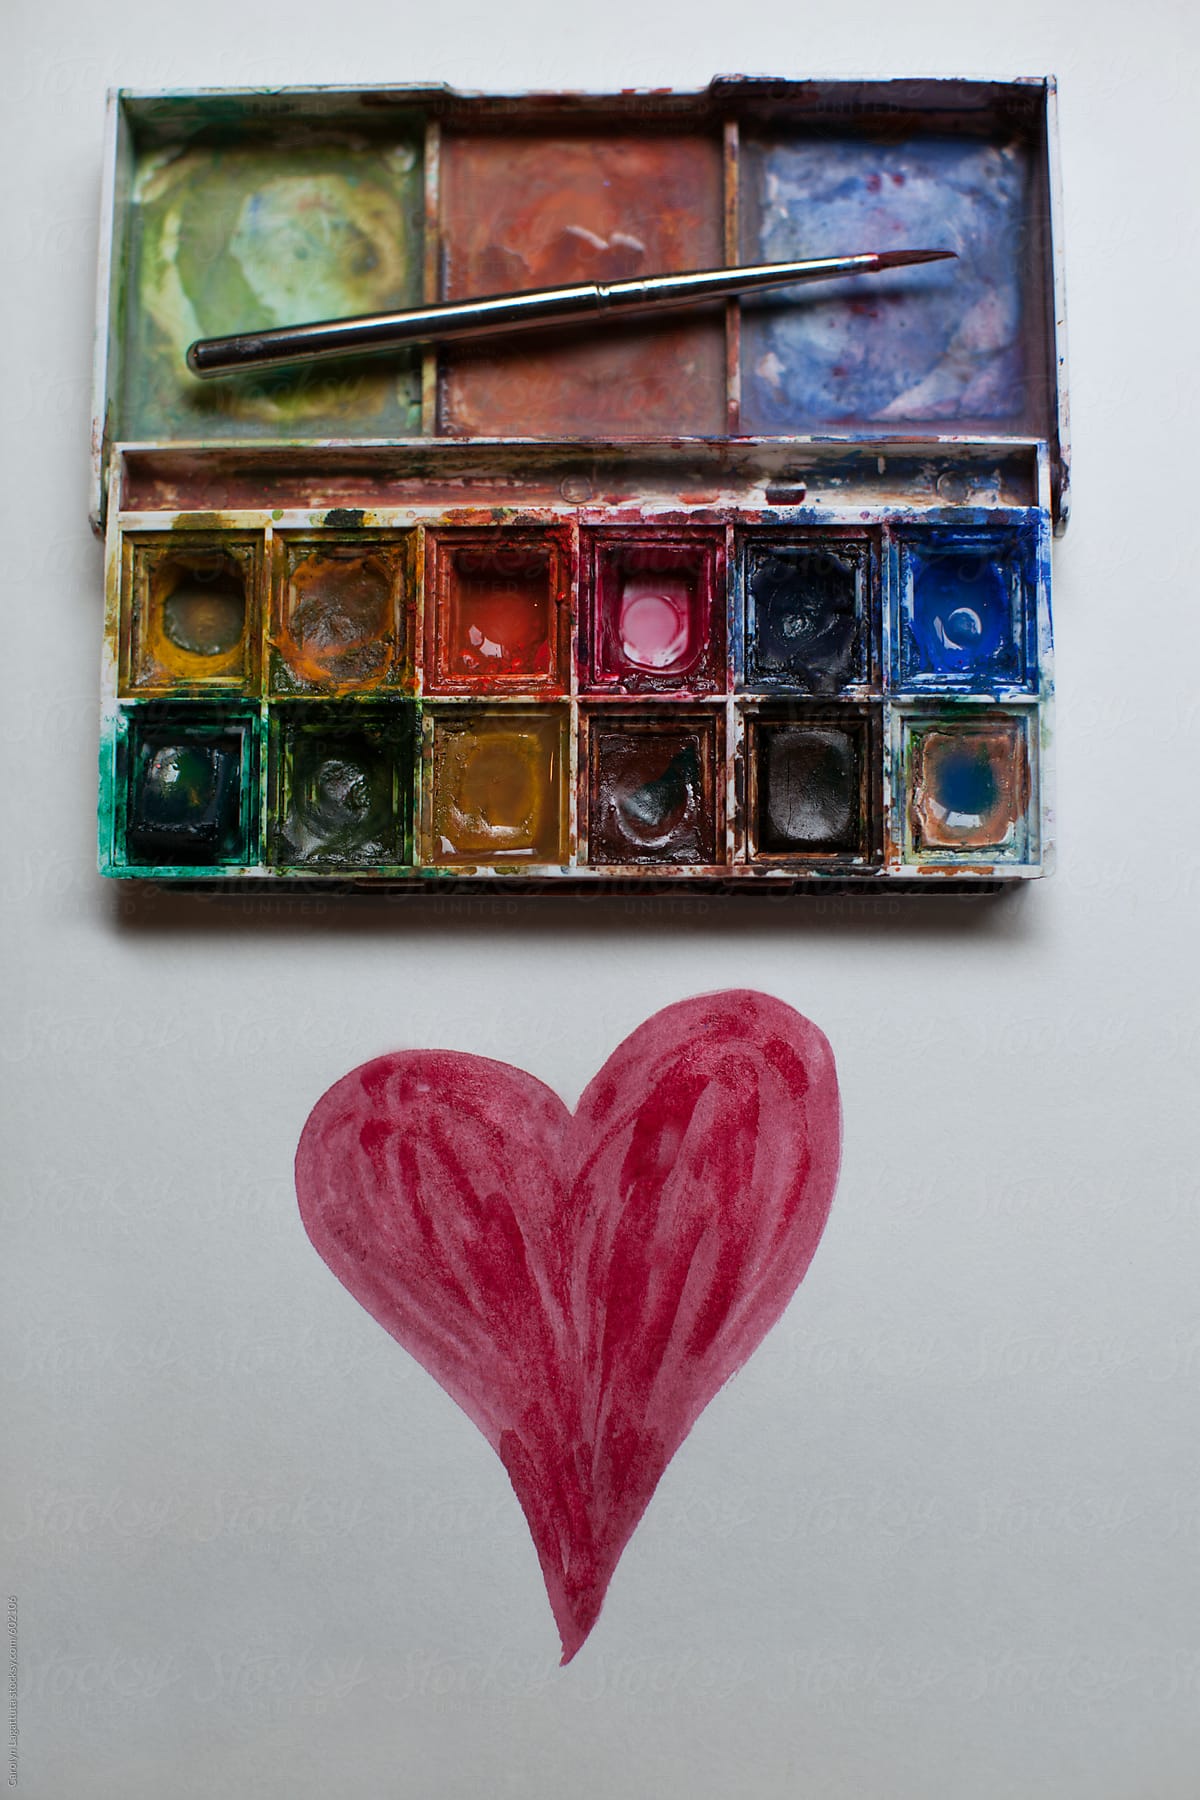 Well loved mini-pallette of paints with a red heart on paper